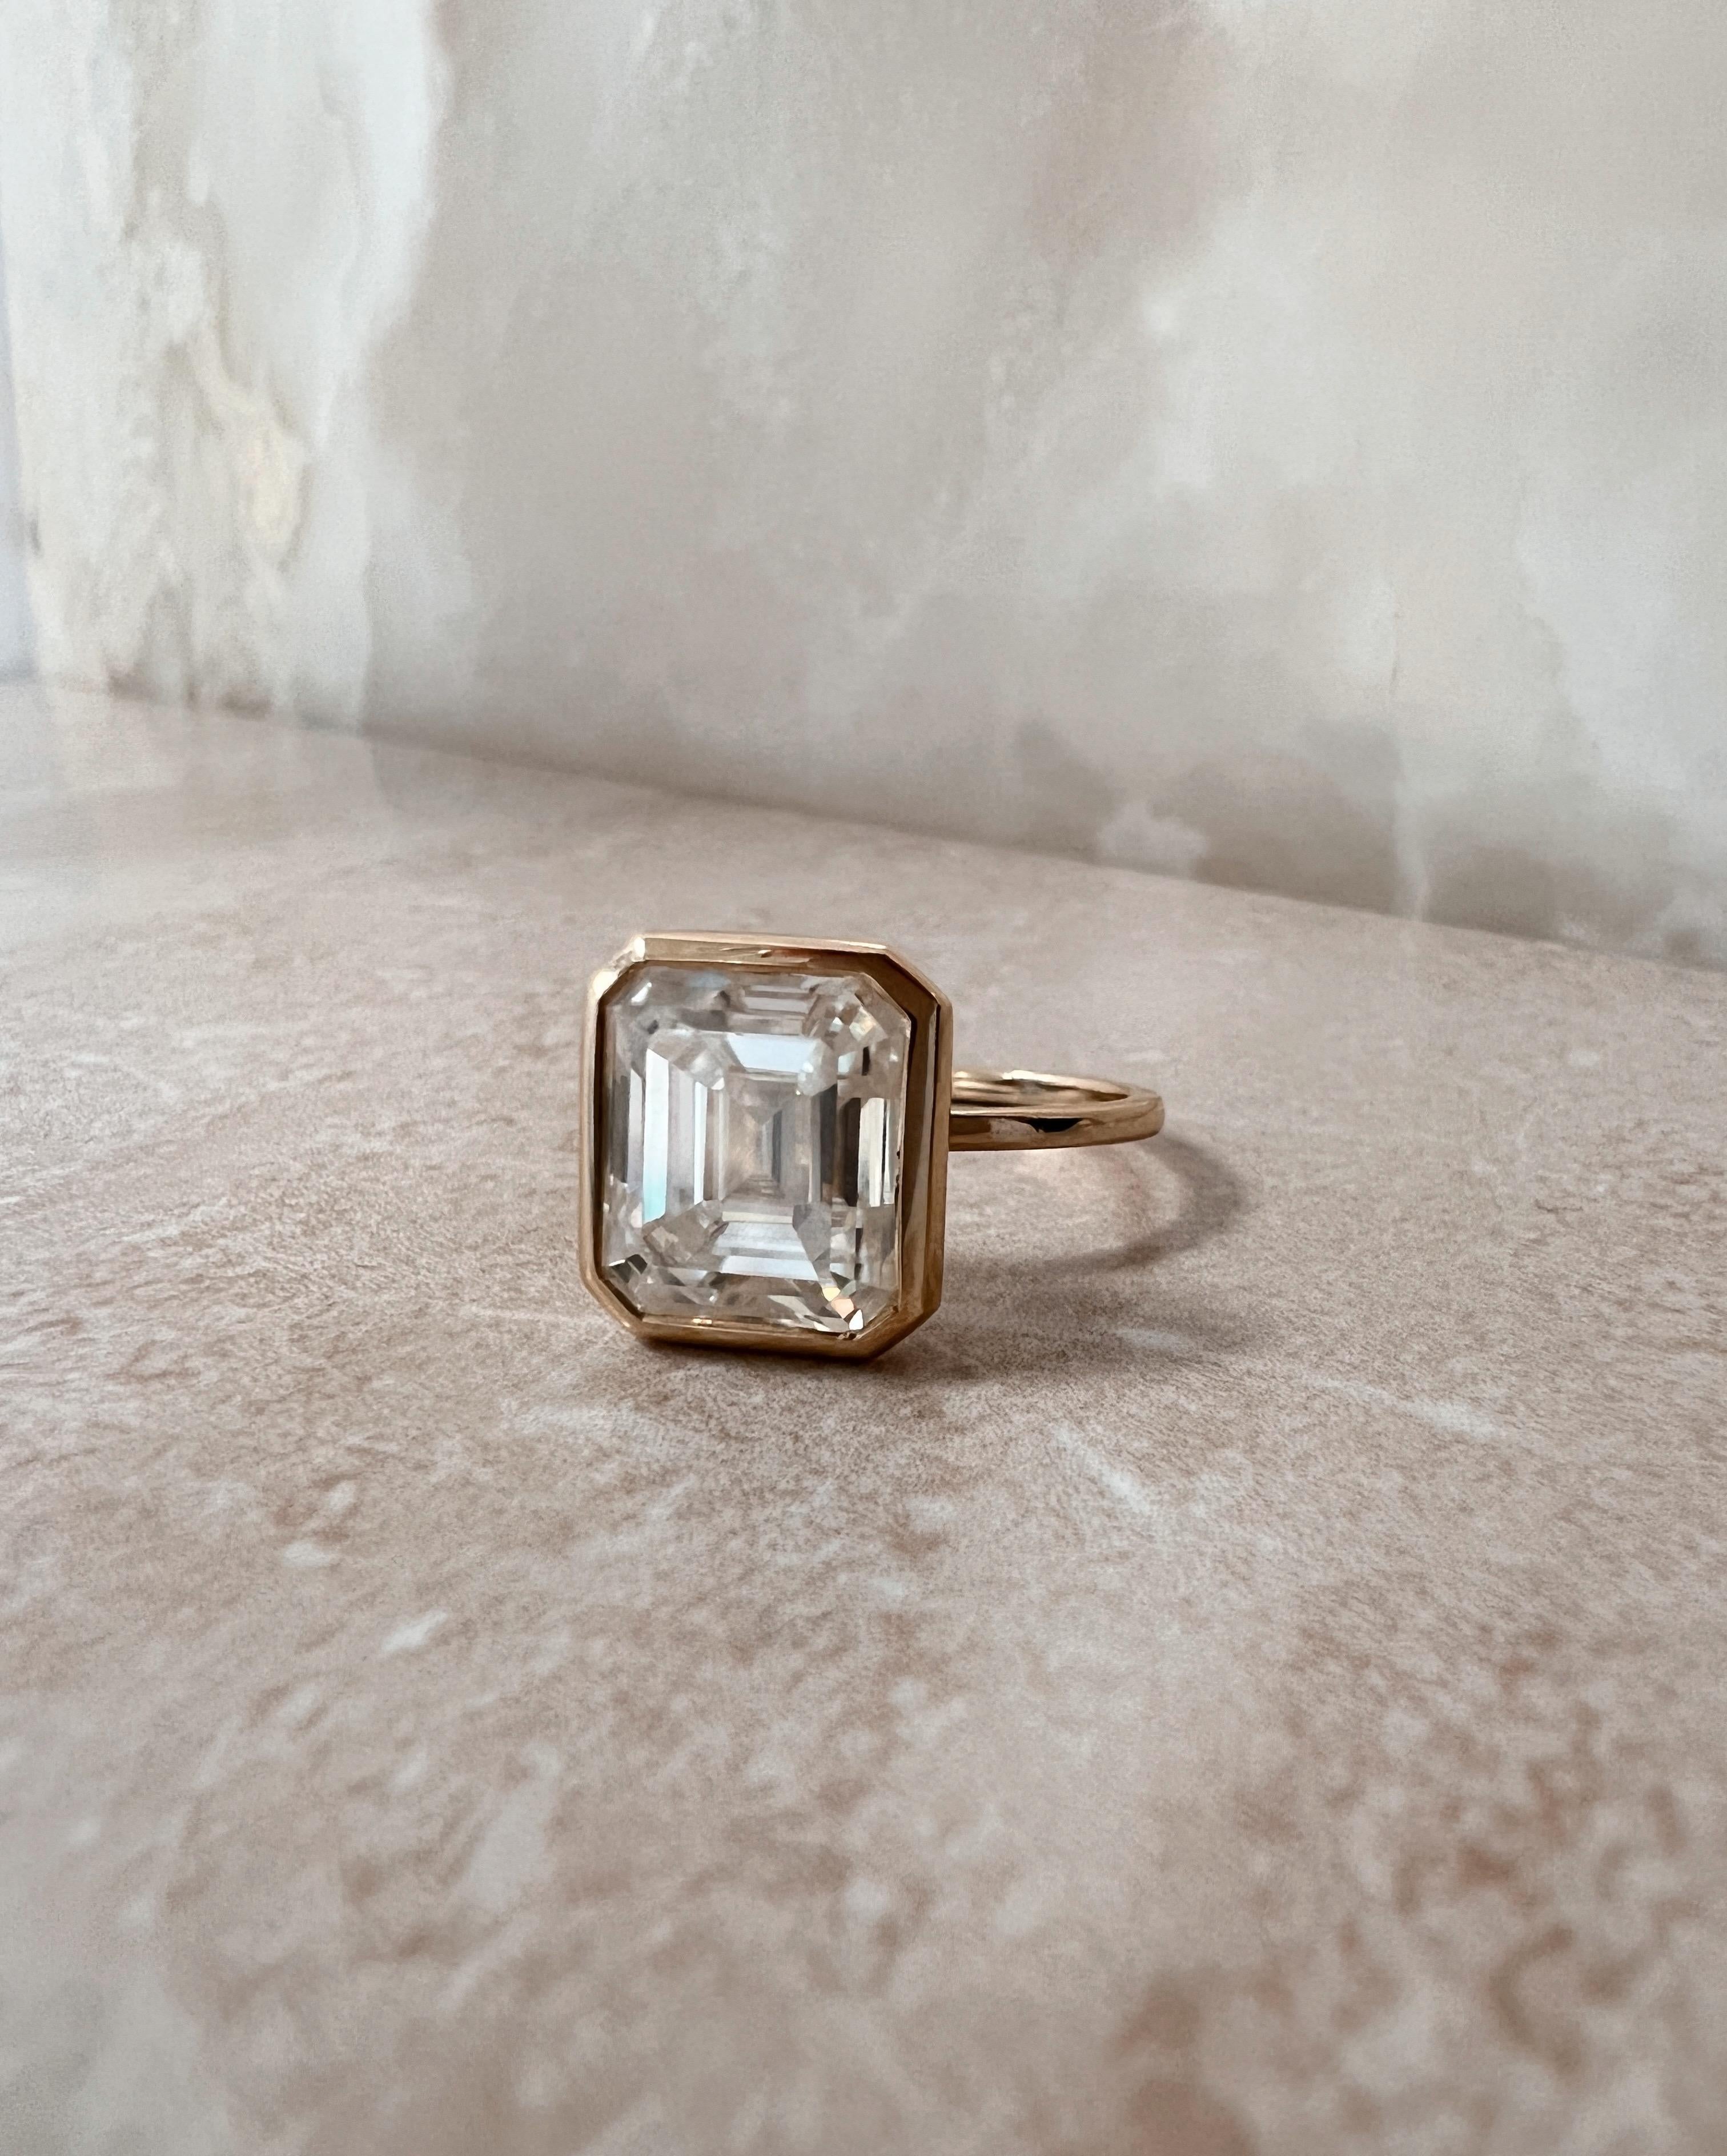 Classic Solitaire ring setting with bezel set center stone
Very simple metal band- approx. 1.25mm wide
Basket is set high
The ring pictured has a 3.70ct Emerald Cut Harro Gem Moissanite center stone (10x8mm, E/F)
14K Yellow Gold- Size 6
This item